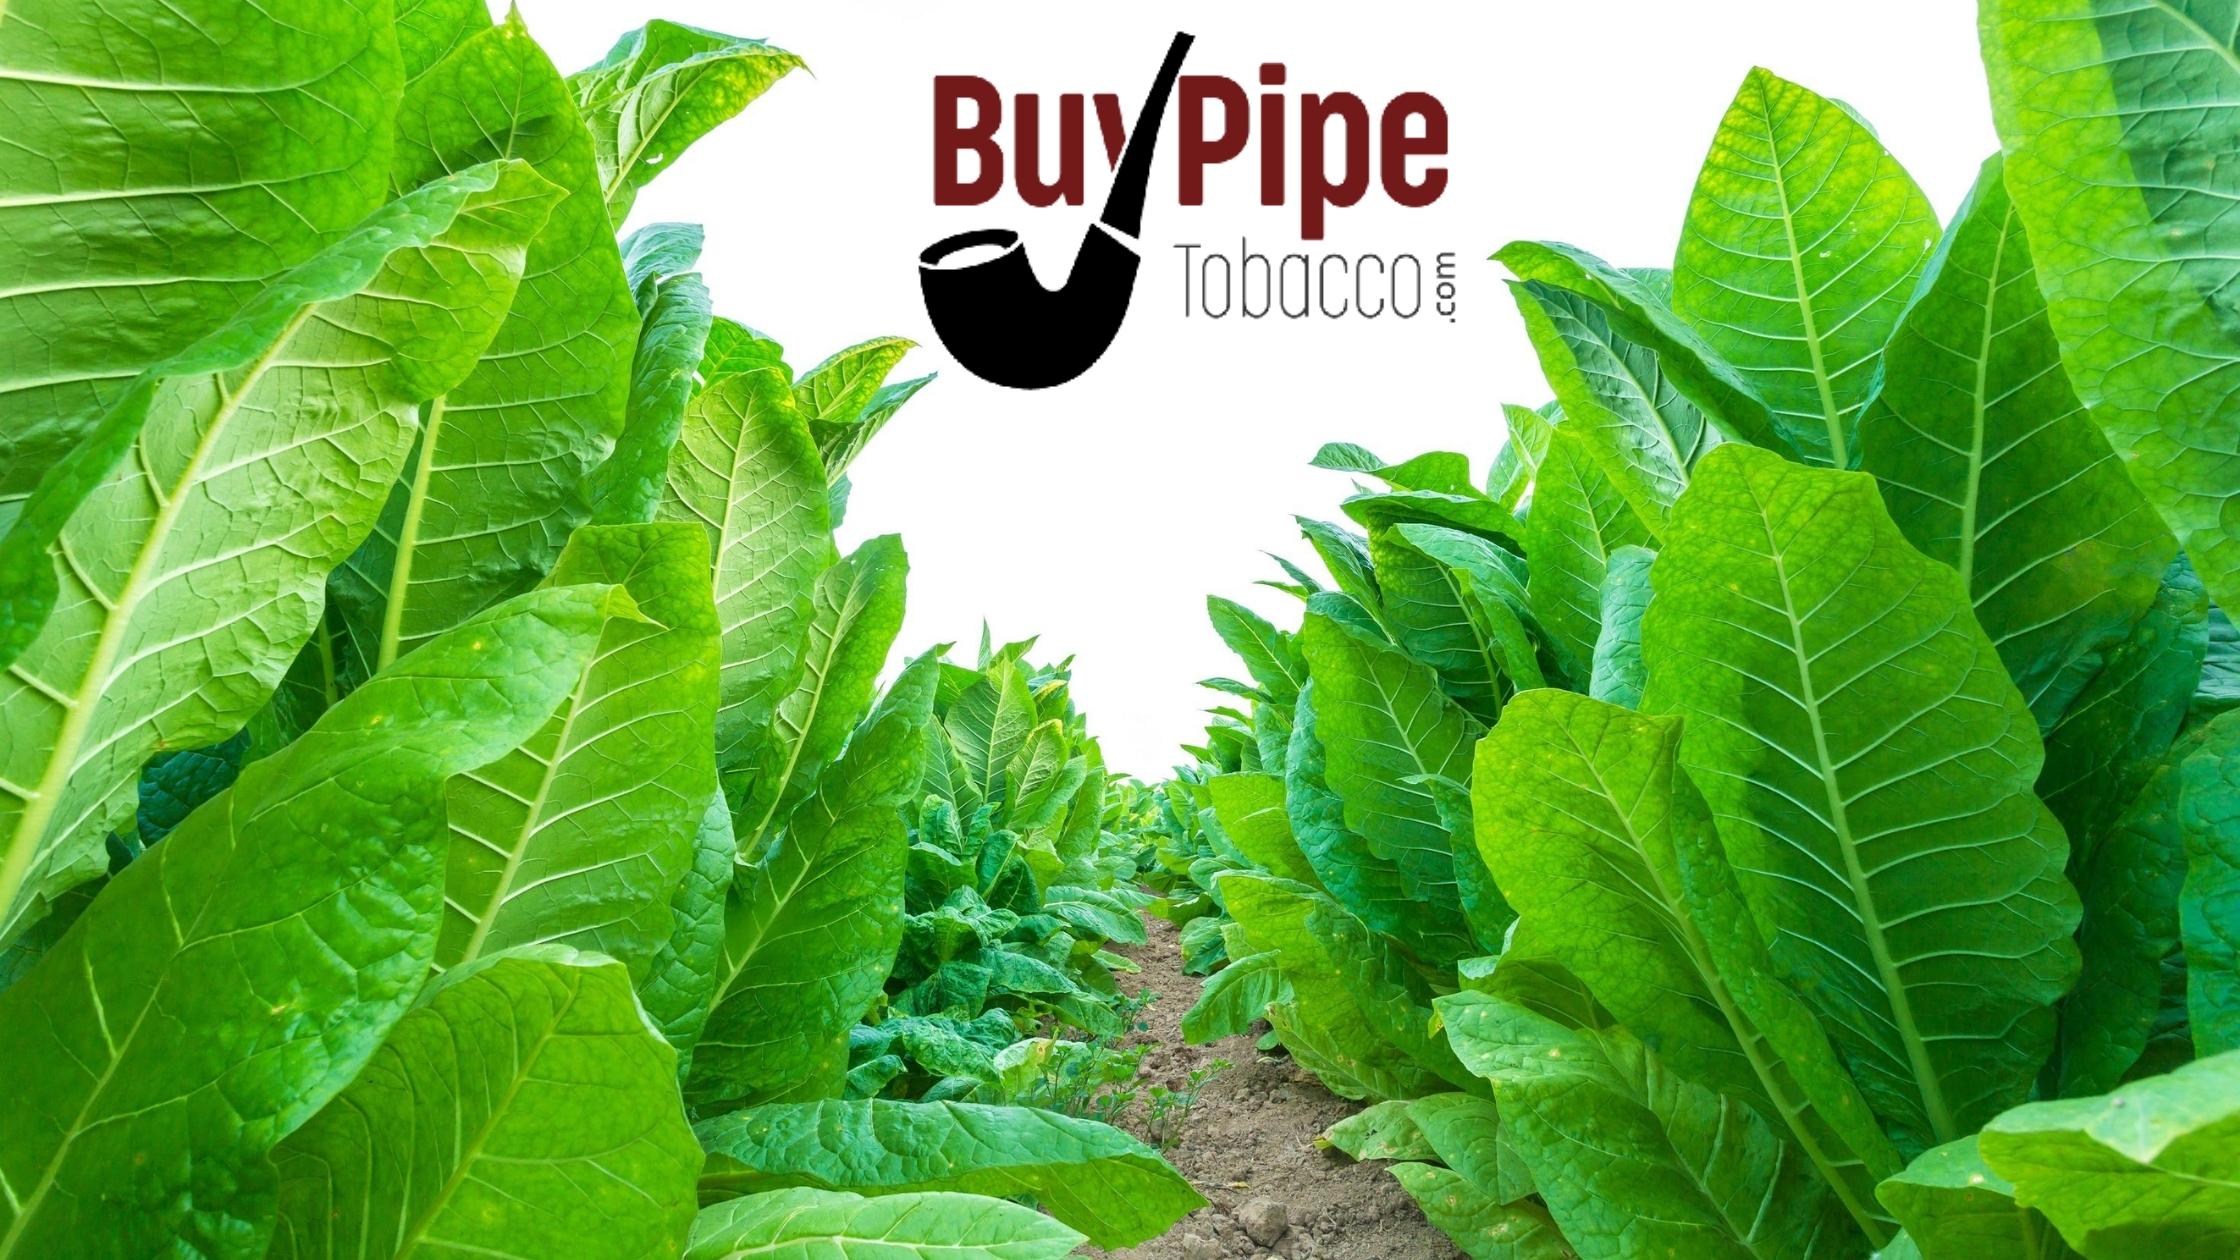 The Top 10 Most Affordable RYO Pipe Tobacco Brands